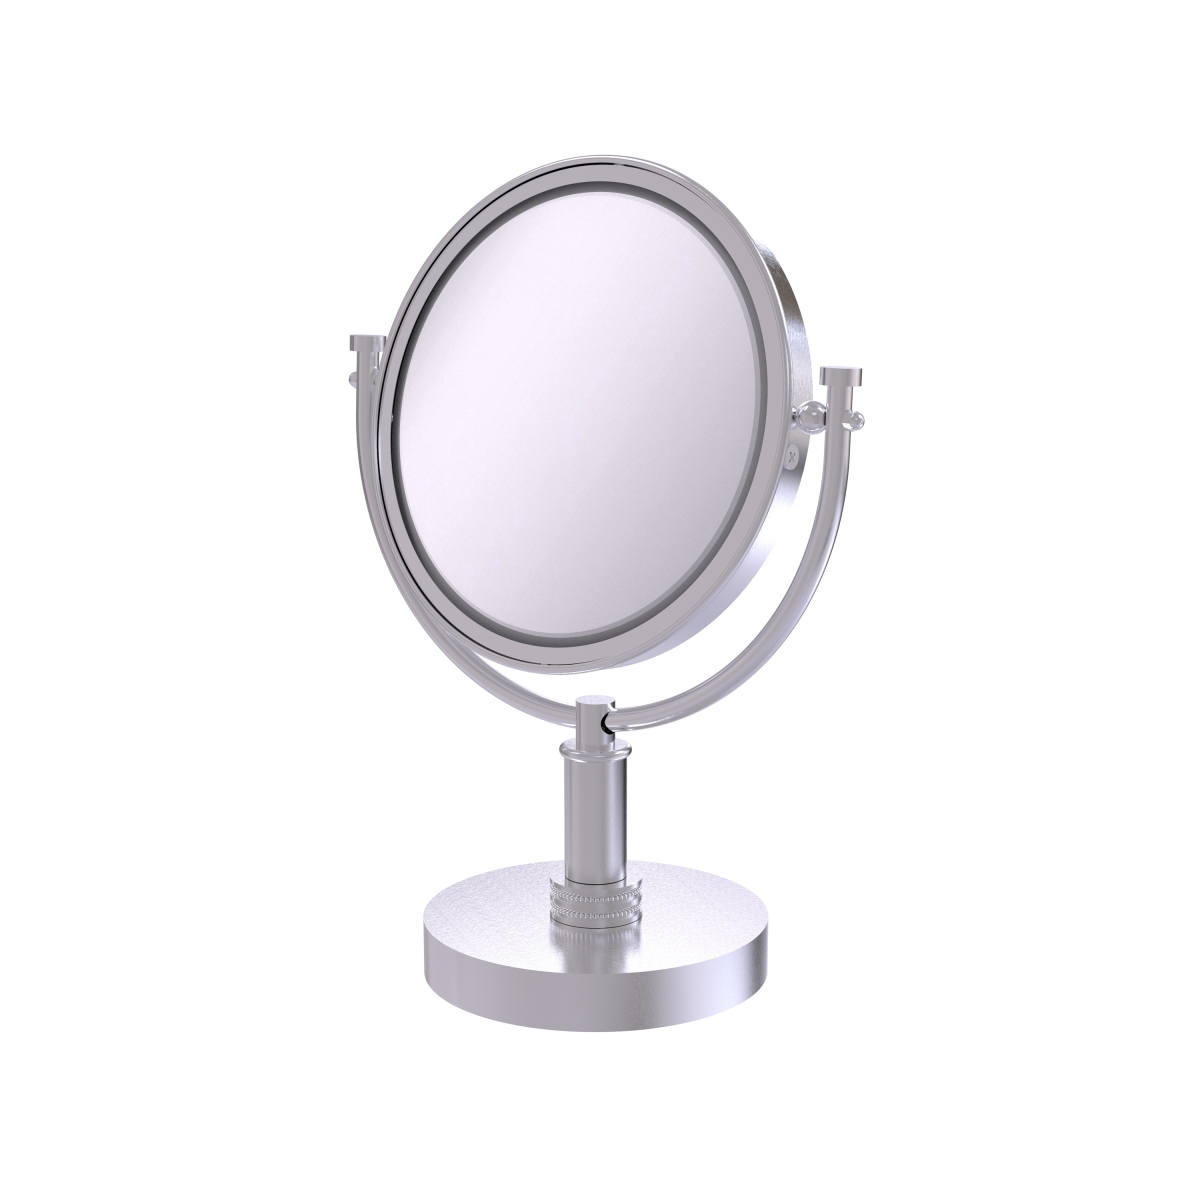 Picture of Allied Brass DM-4D-3X-SCH 8 in. Vanity Top Make-Up Mirror 3X Magnification, Satin Chrome - 15 x 8 x 8 in.